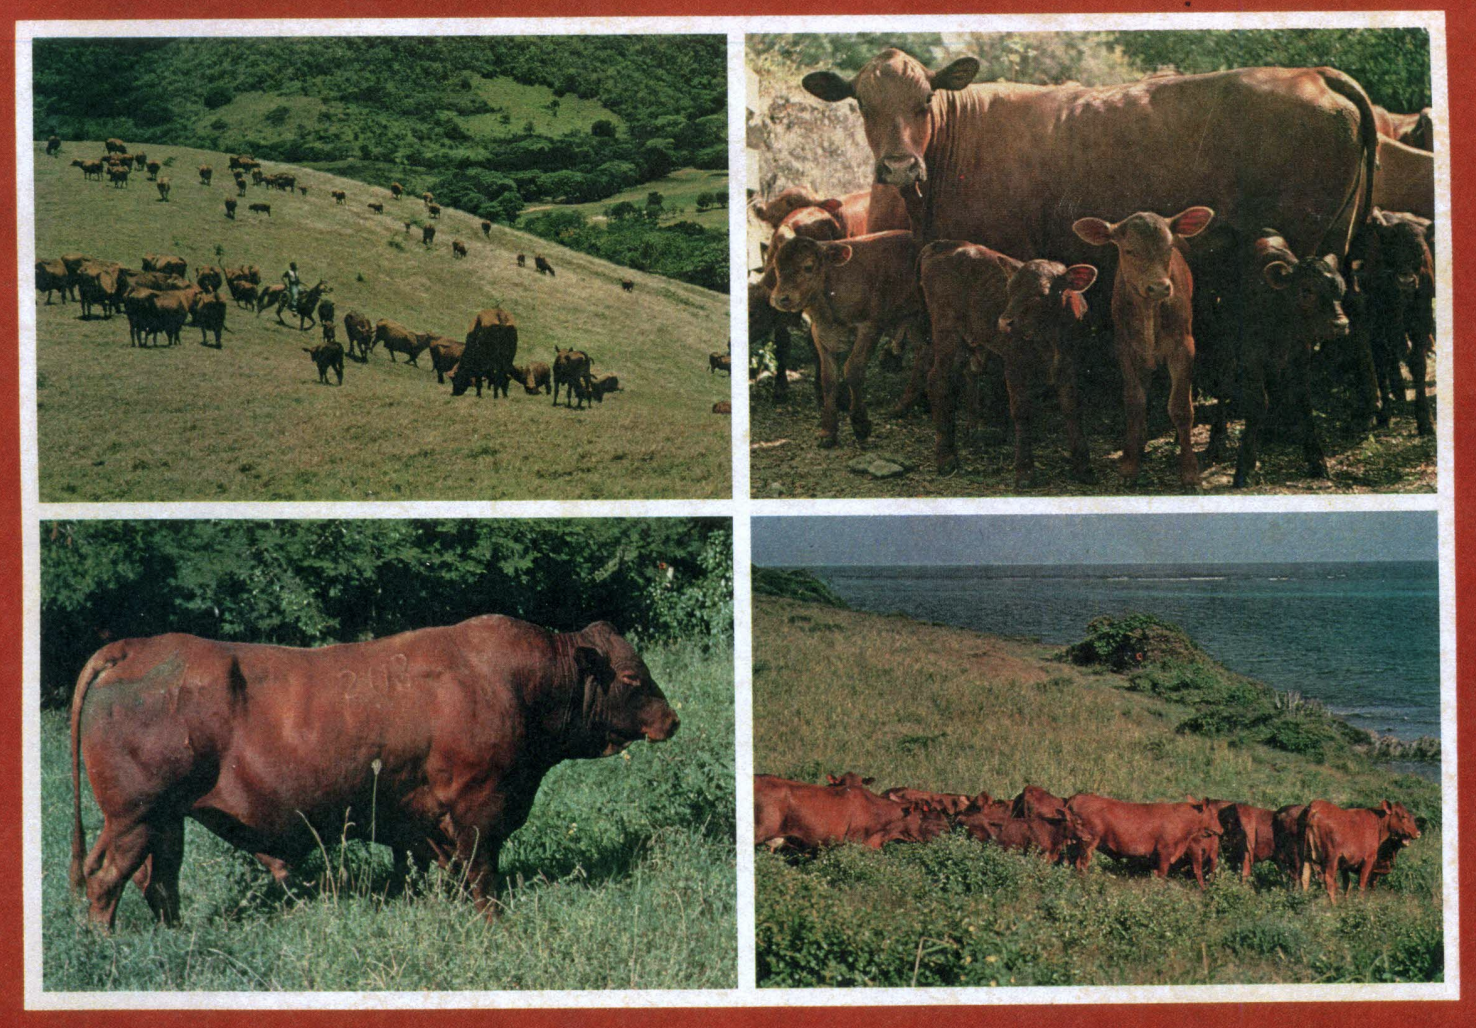 These are the native Senepol cattle of the Virgin Islands known worldwide for their special breed of heat tolerance, insect and disease resistance, and their ability to thrive on poor pasture land. These beautiful animals are no longer dominate on the landscape of St. Croix. (Photo courtesy Wikipedia)